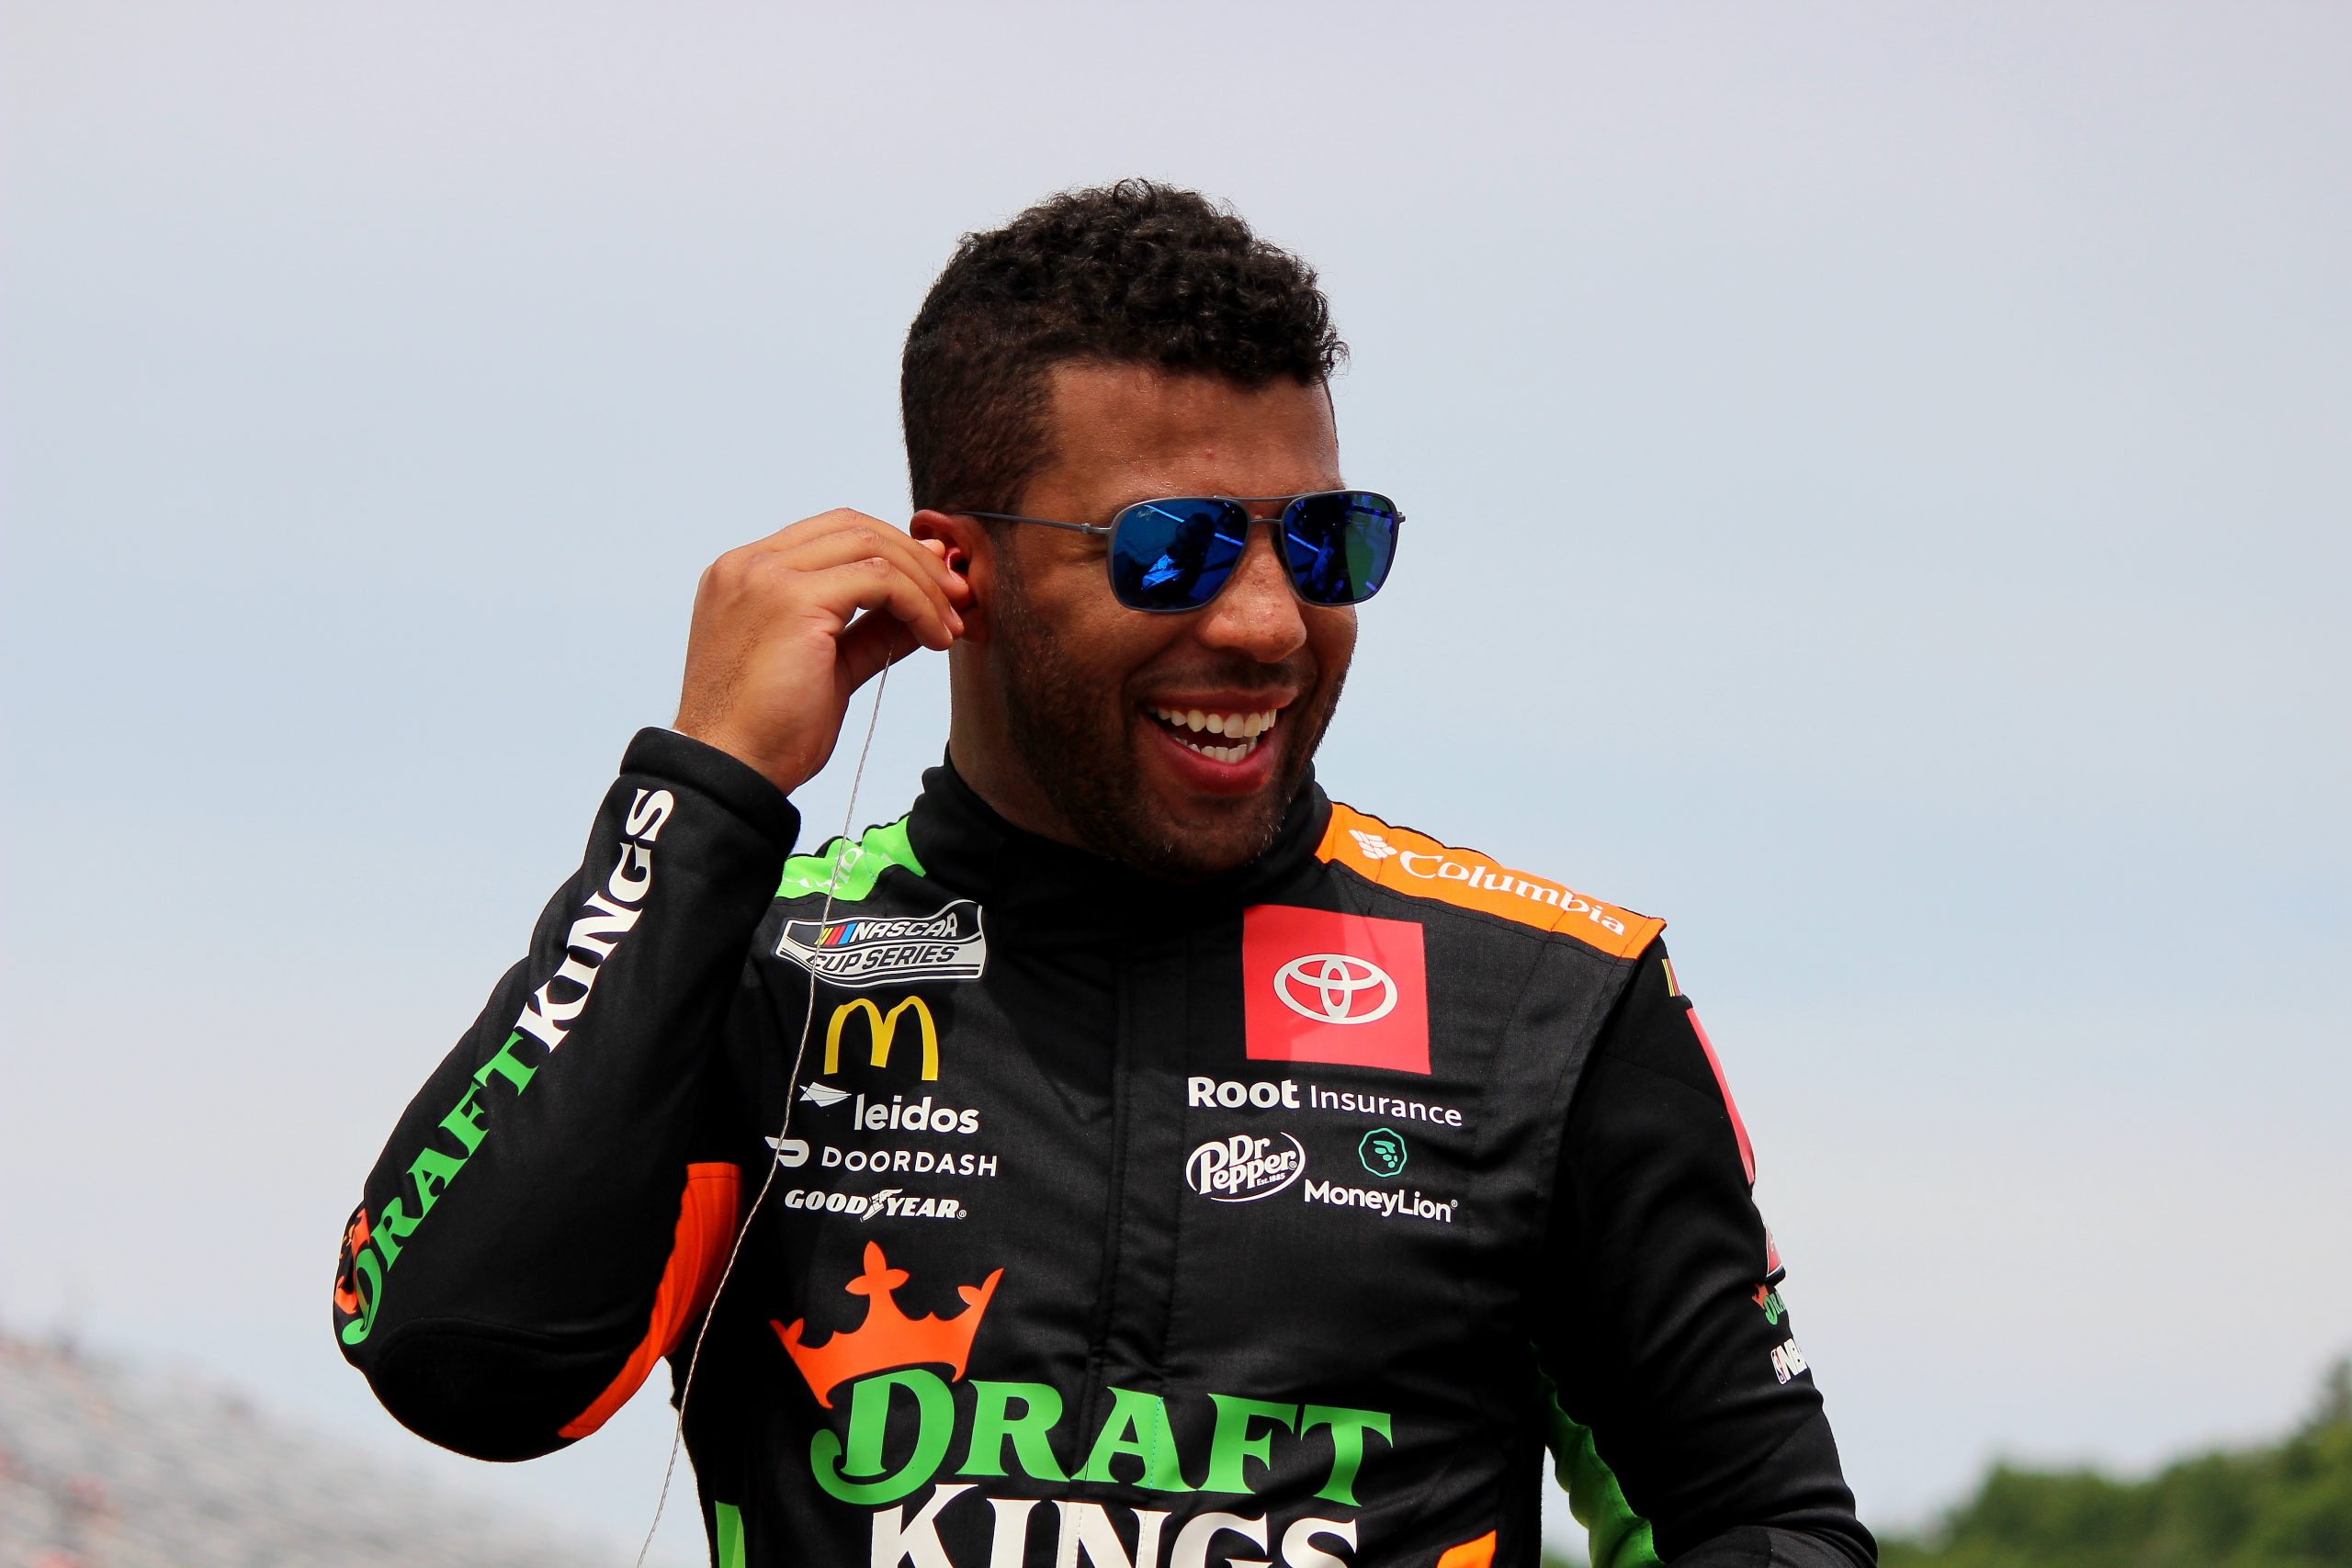 Bubba Wallace was all smiles all weekend at New Hampshire. (Photo: Josh Jones | The Podium Finish)